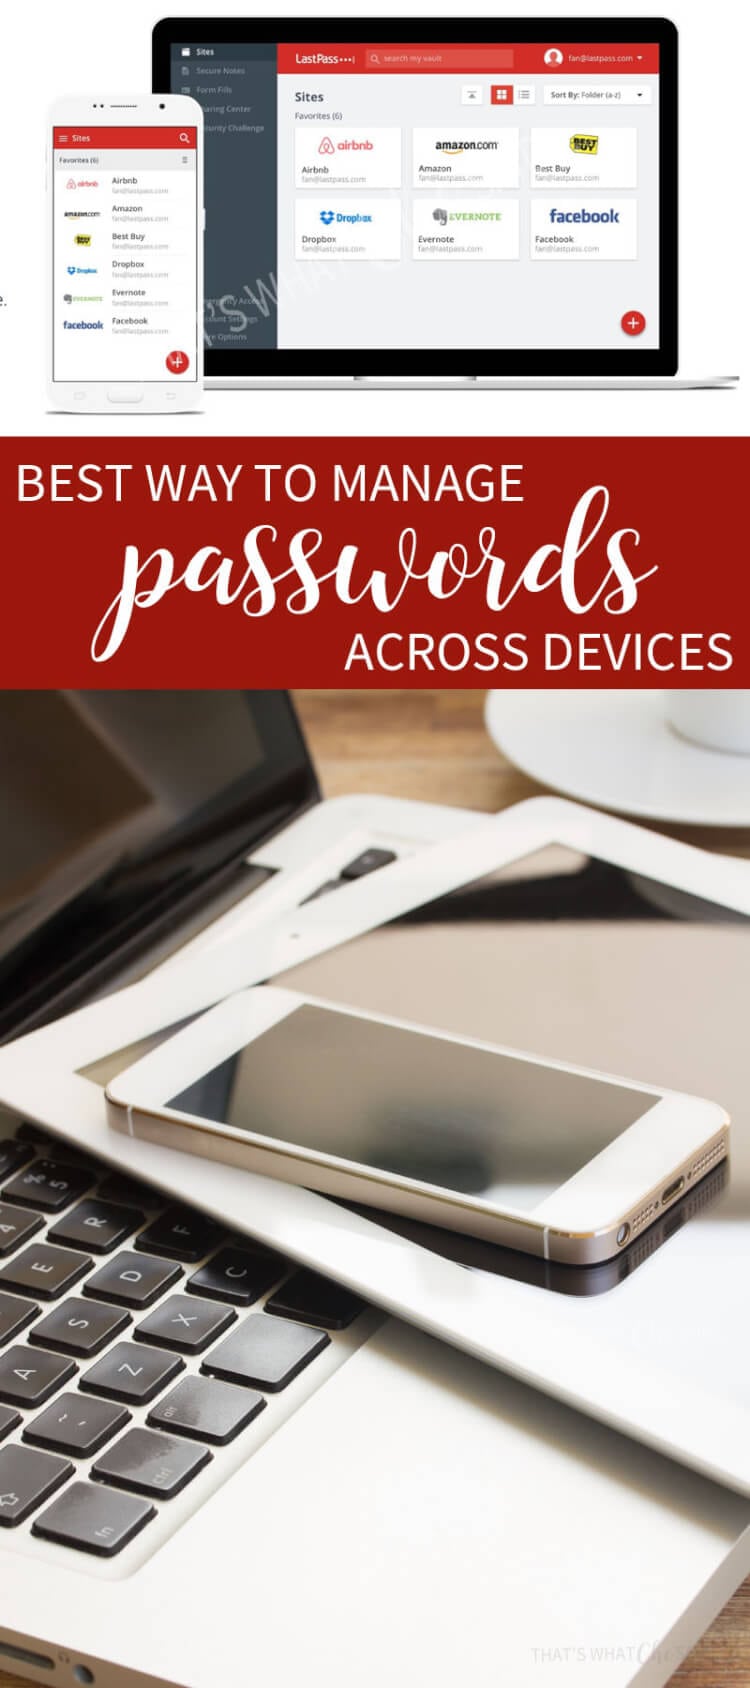 how to manage passwords